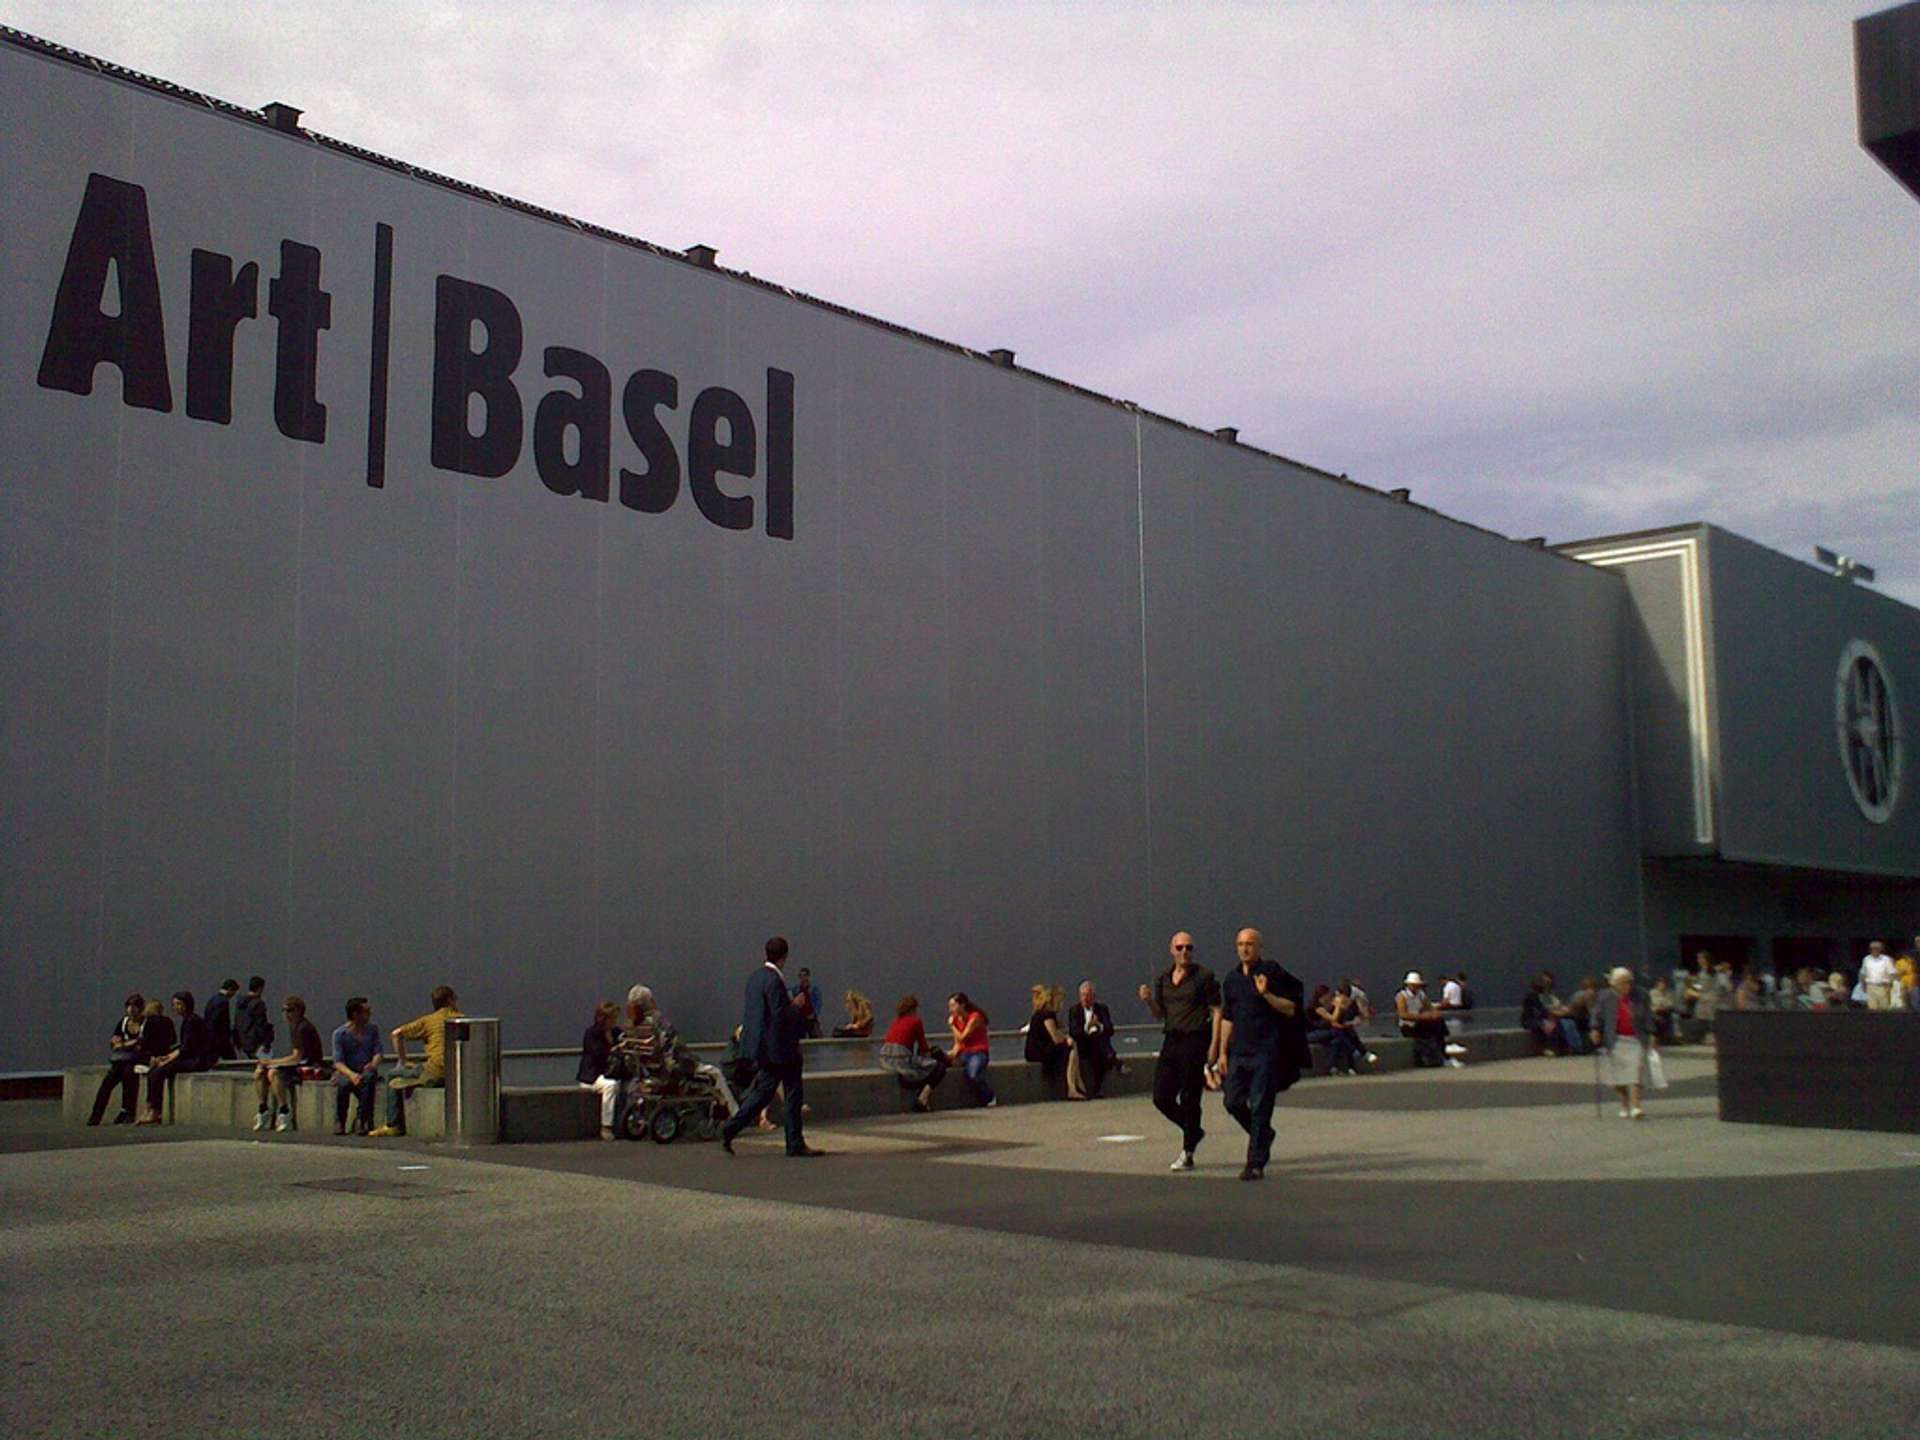 An exterior photograph of the Art Basel 2009 building with people walking by.